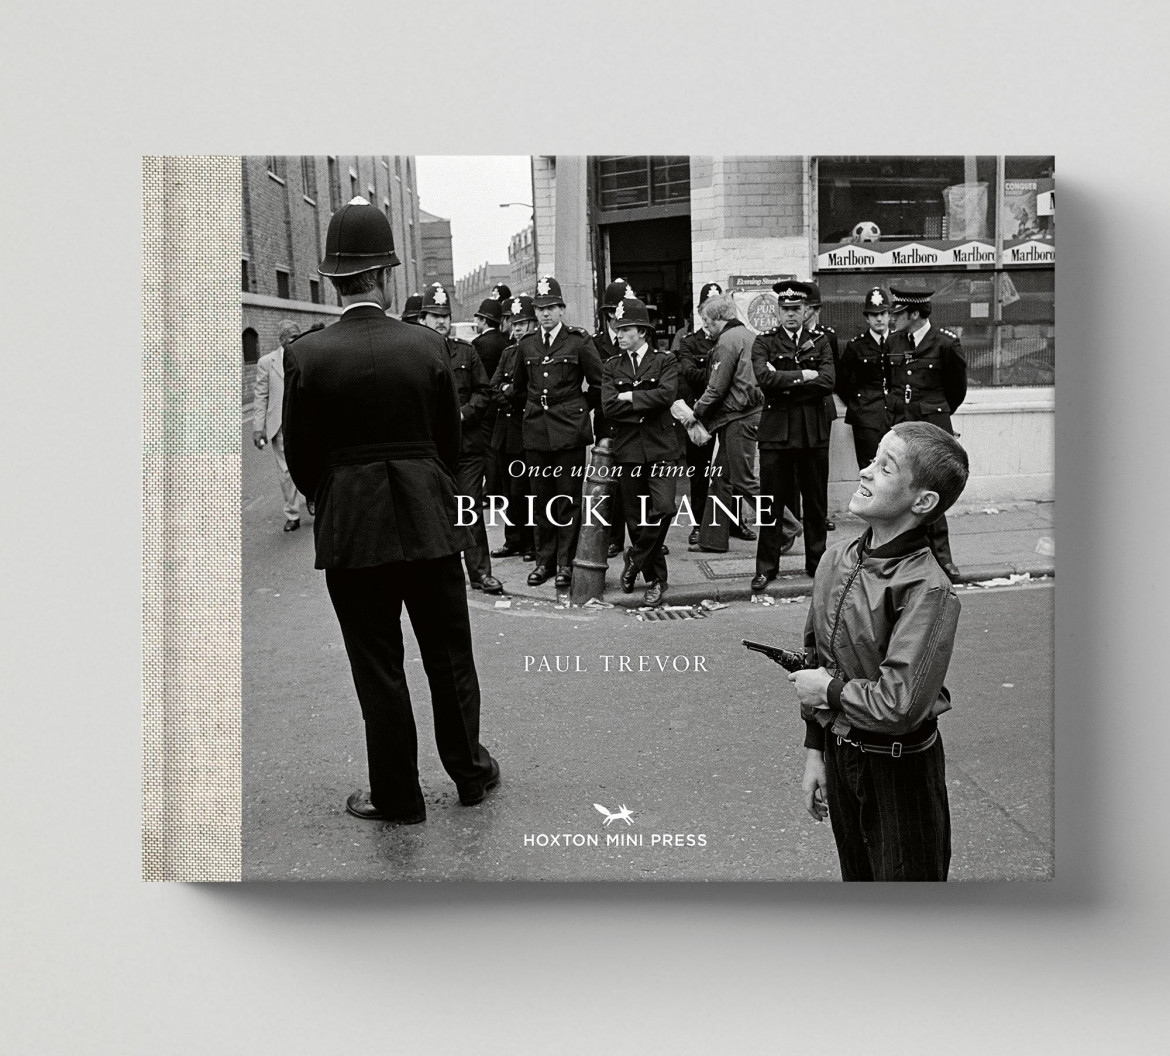 "Once Upon a Time in Brick Lane", Paul Trevor / Hoxton Mini Press, 2019